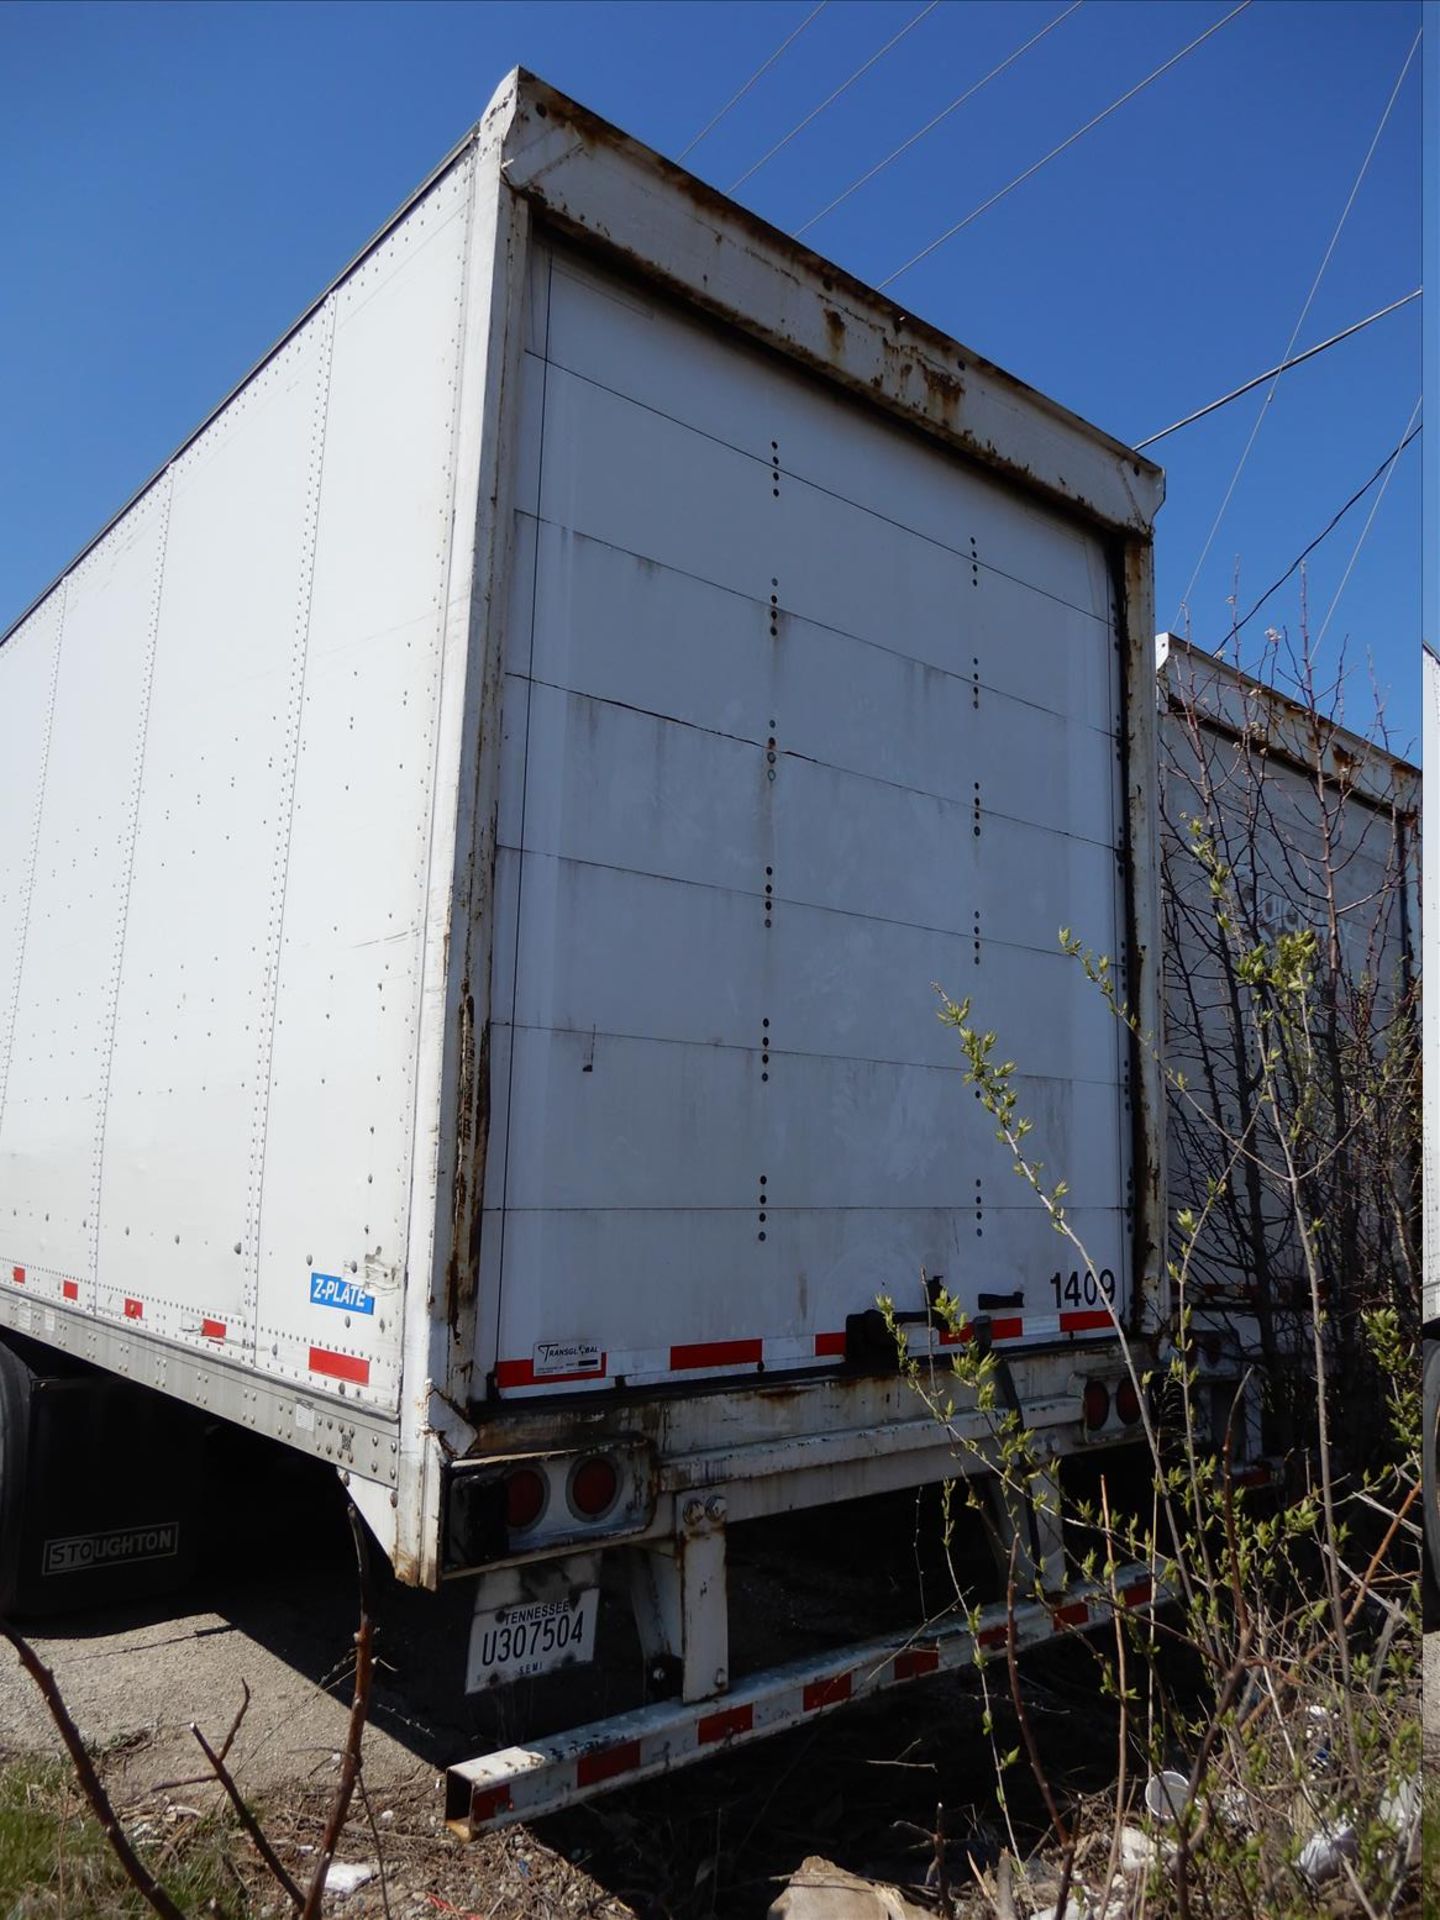 2012 Stoughton Trailer - Located in Indianapolis, IN - Image 18 of 32